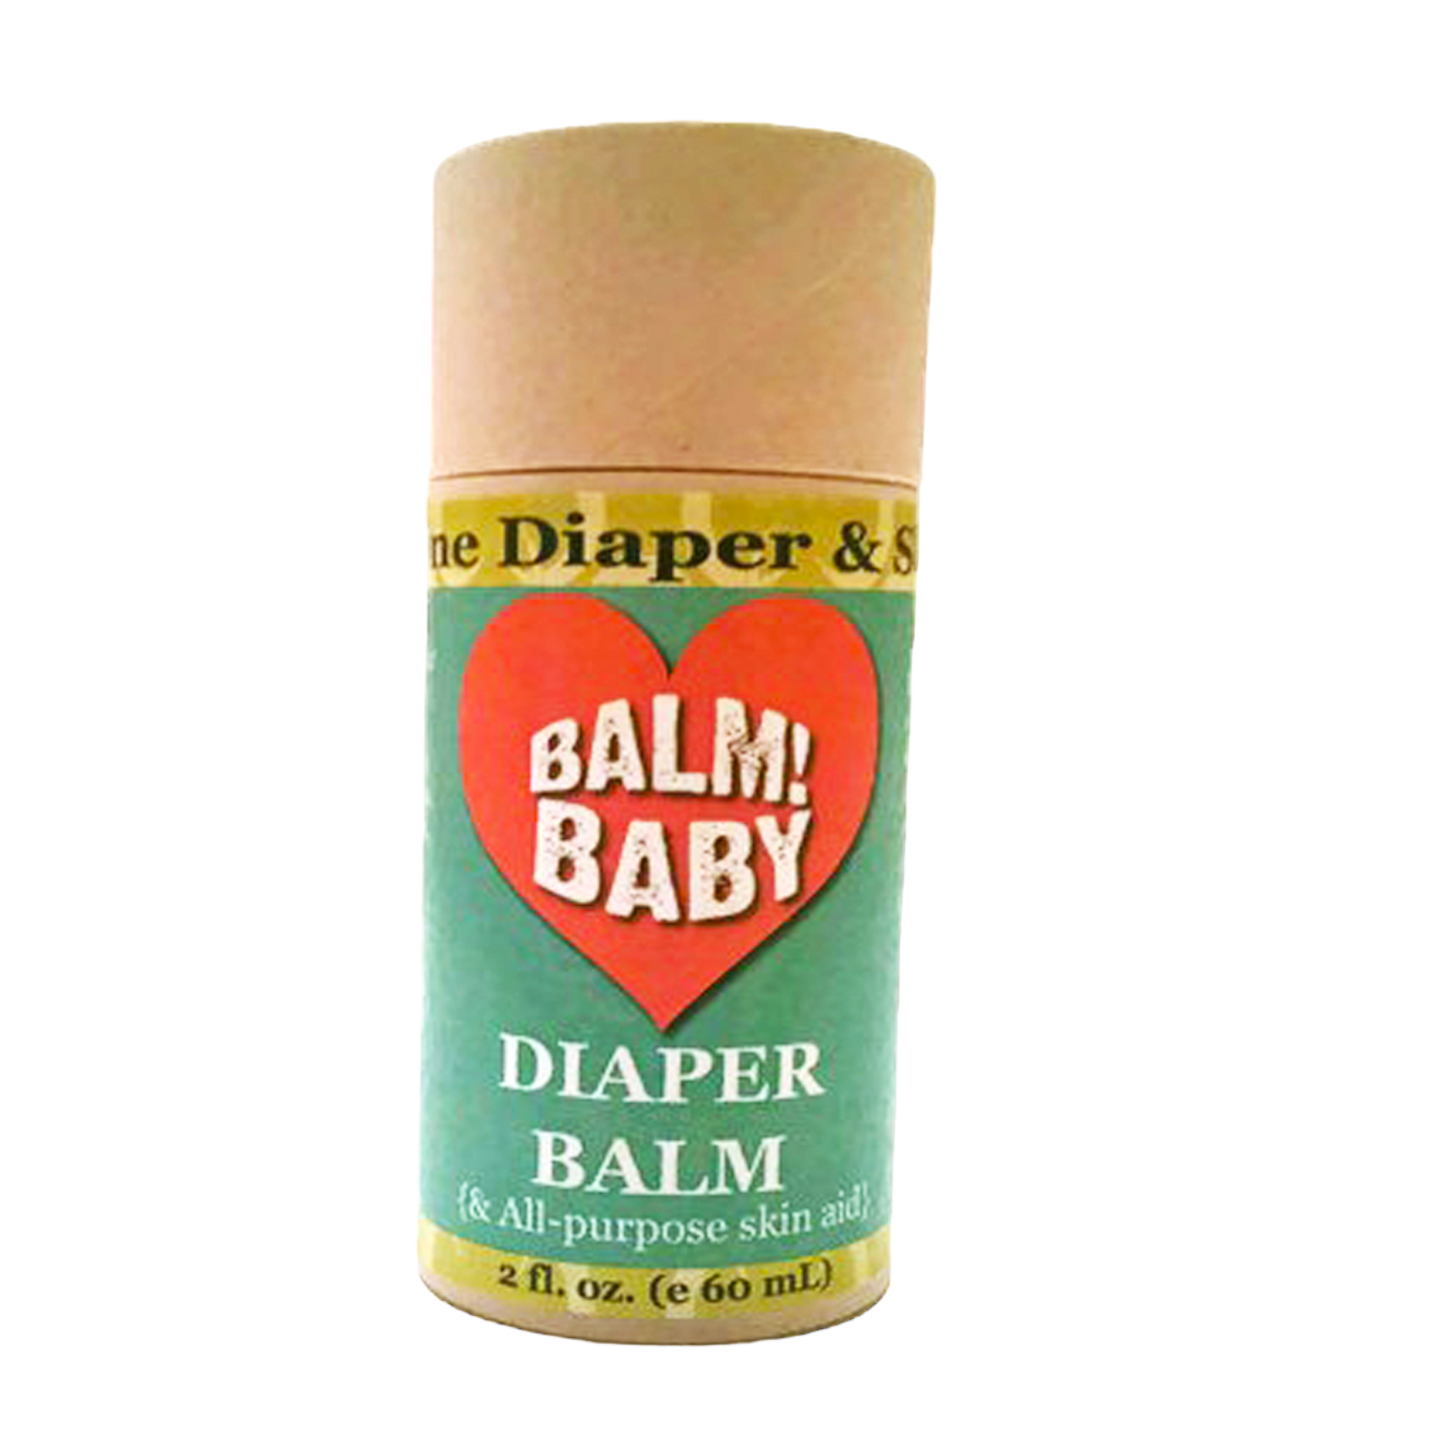 BALM! Baby - Diaper Balm and ALL purpose skin aid in BIODEGRADABLE STICK